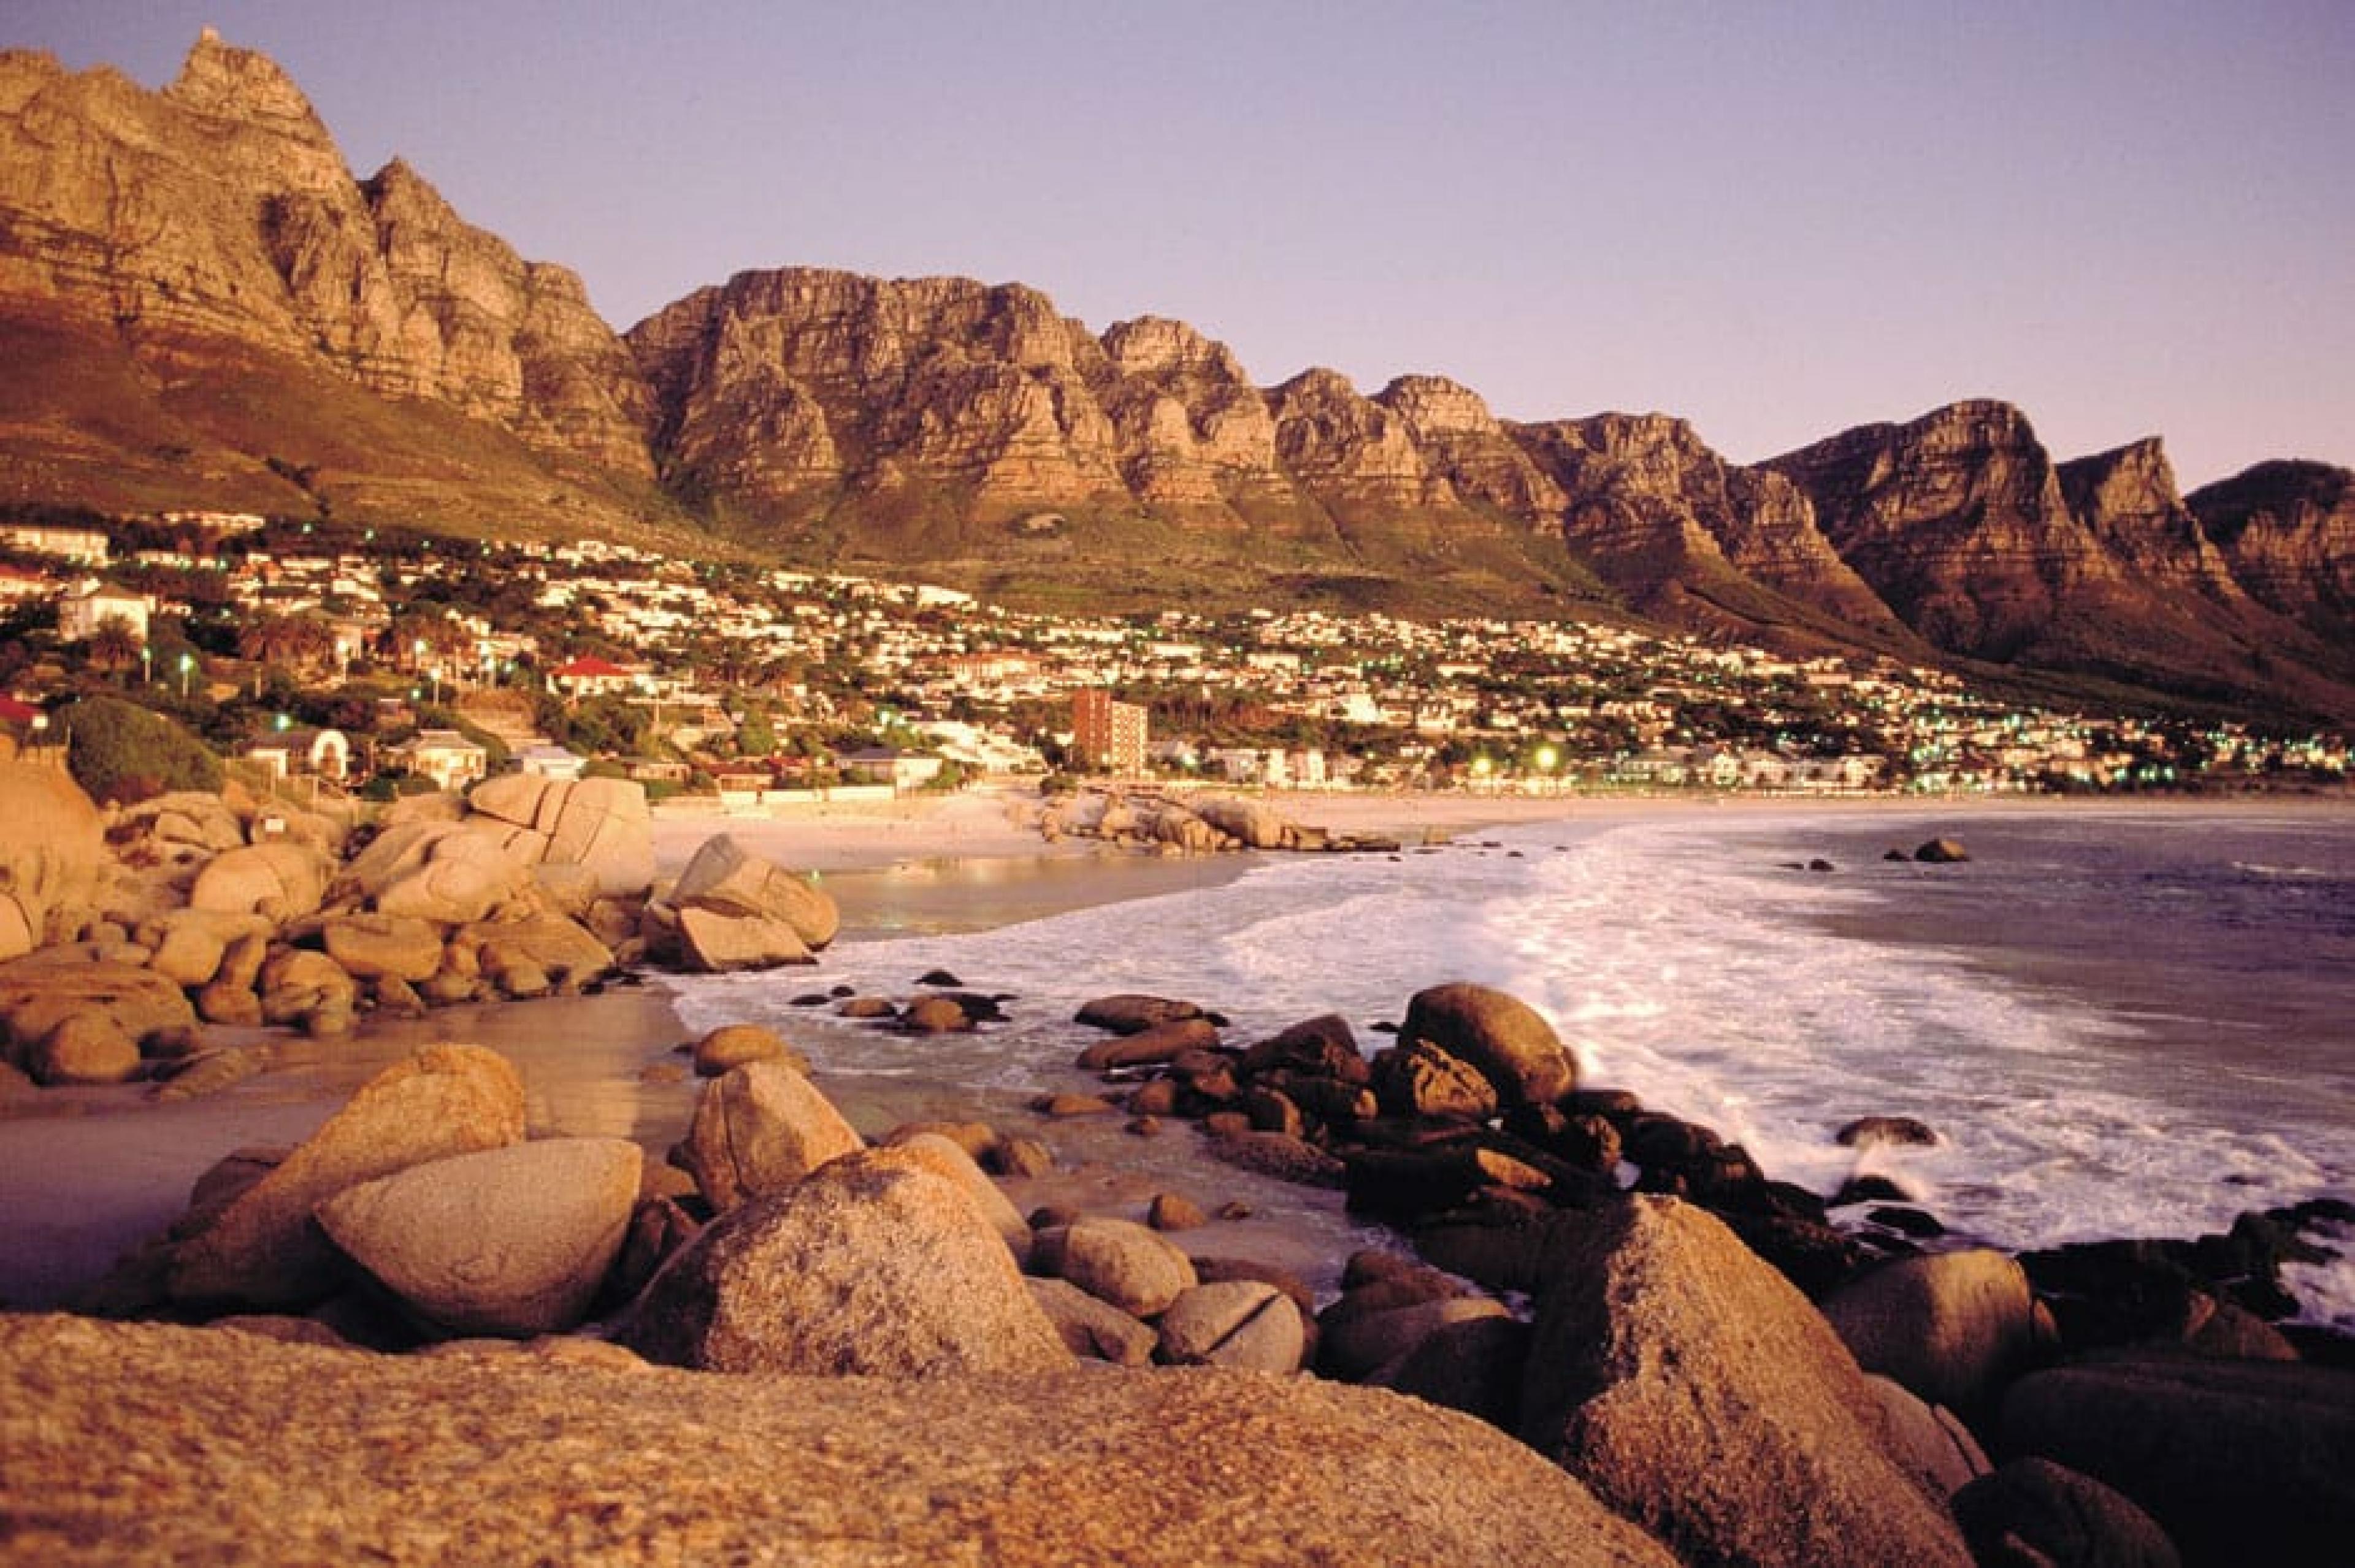 Aerial View-Camps Bay Beach ,Cape Town, South Africa-Courtesy of Jon Hrusa